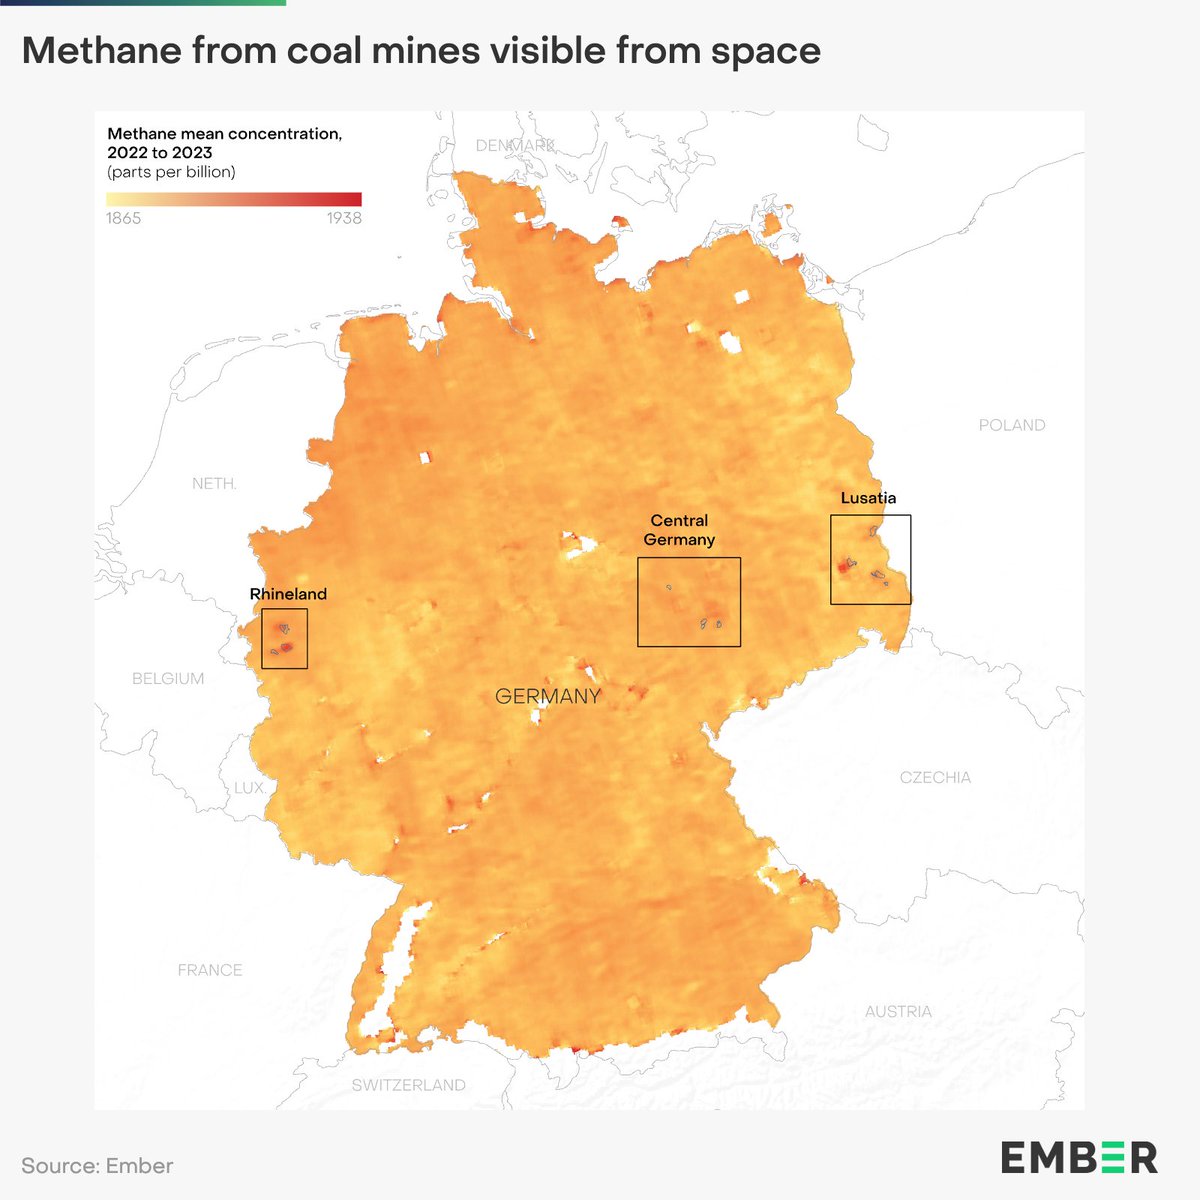 🇩🇪 produced 44% of the 🇪🇺 lignite in 2022, but reported 1% of the emissions from active surface mines in the EU. Methane from 🇩🇪 coal mines is visible from satellite data, indicating that coal mine methane emission data aren't adequately estimated. ember-climate.org/insights/in-br…